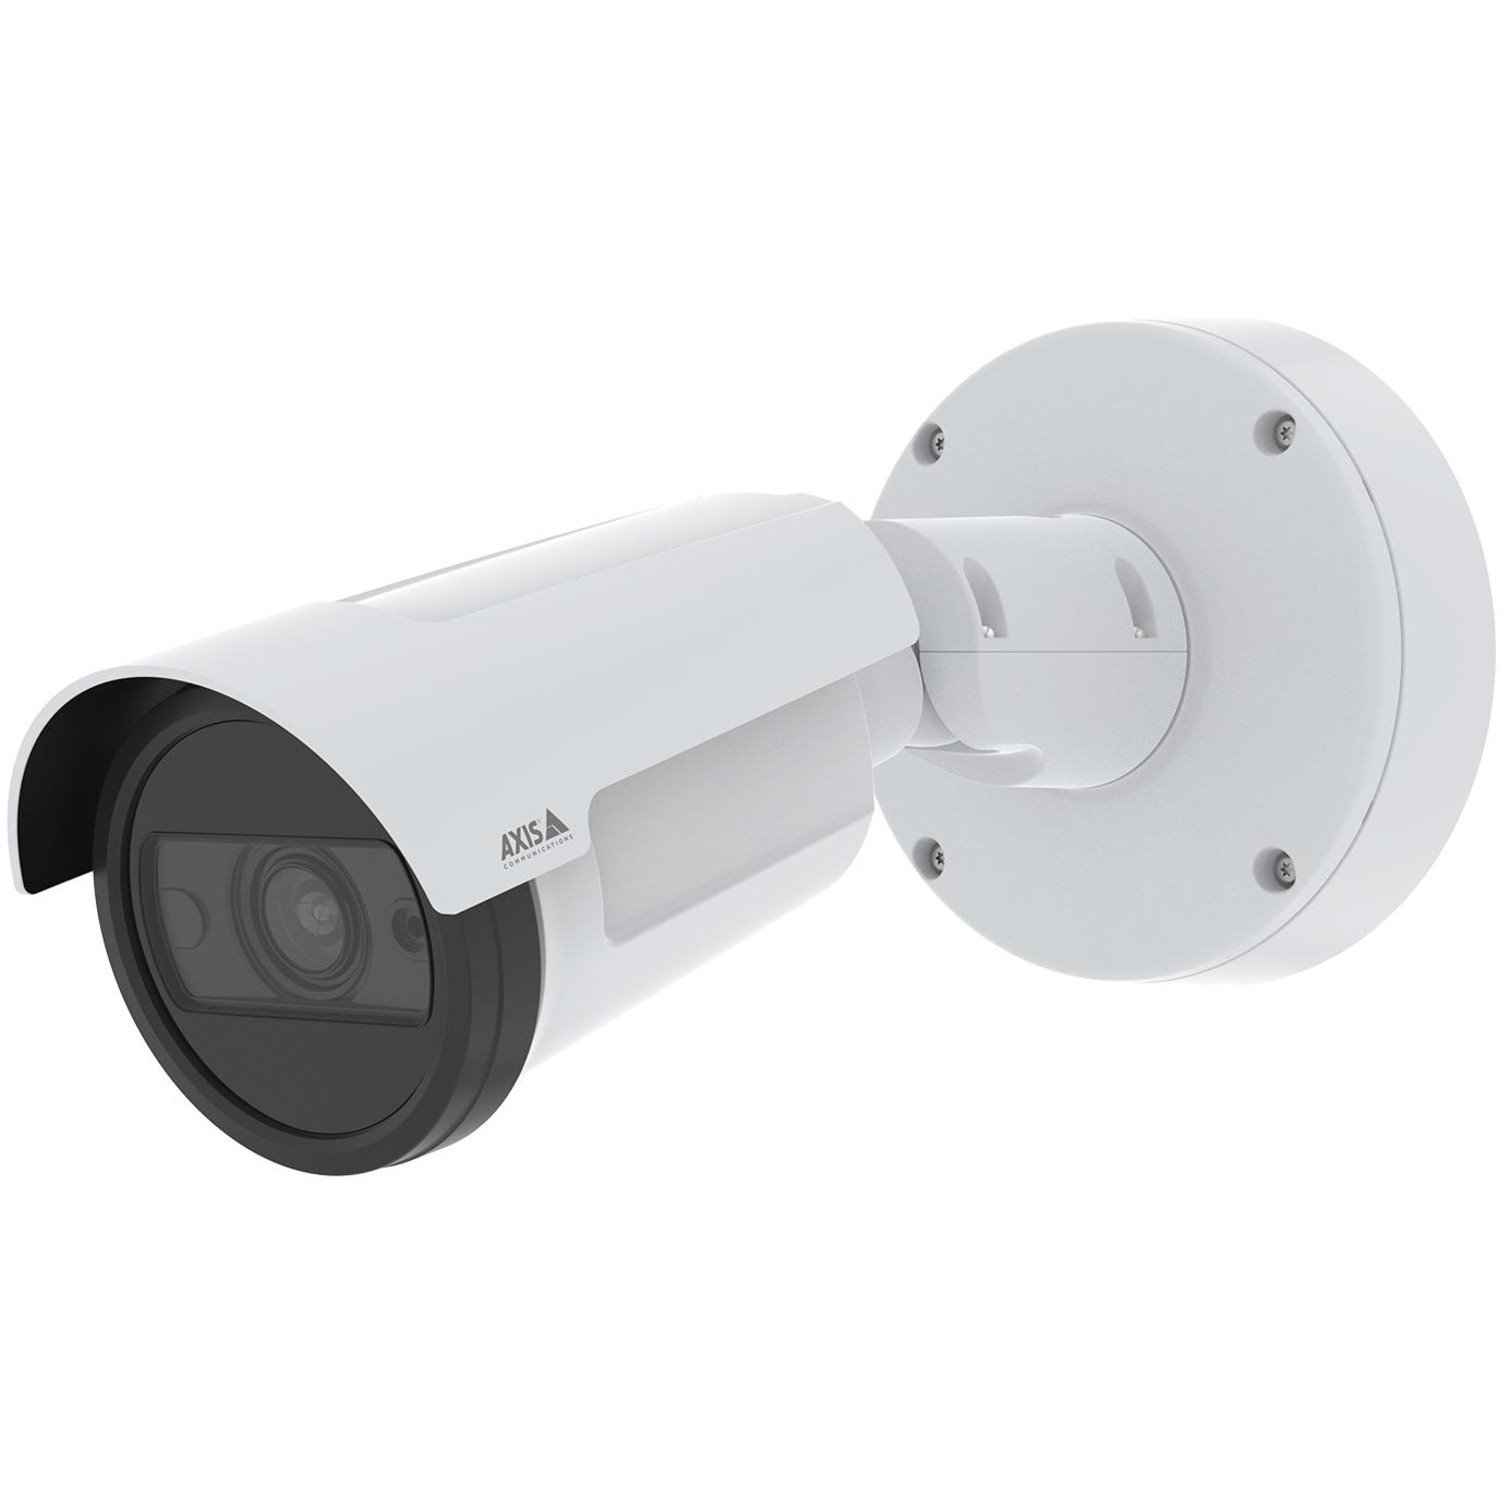 AXIS P1465-LE 2 Megapixel Outdoor Full HD Network Camera - Colour - Bullet - TAA Compliant